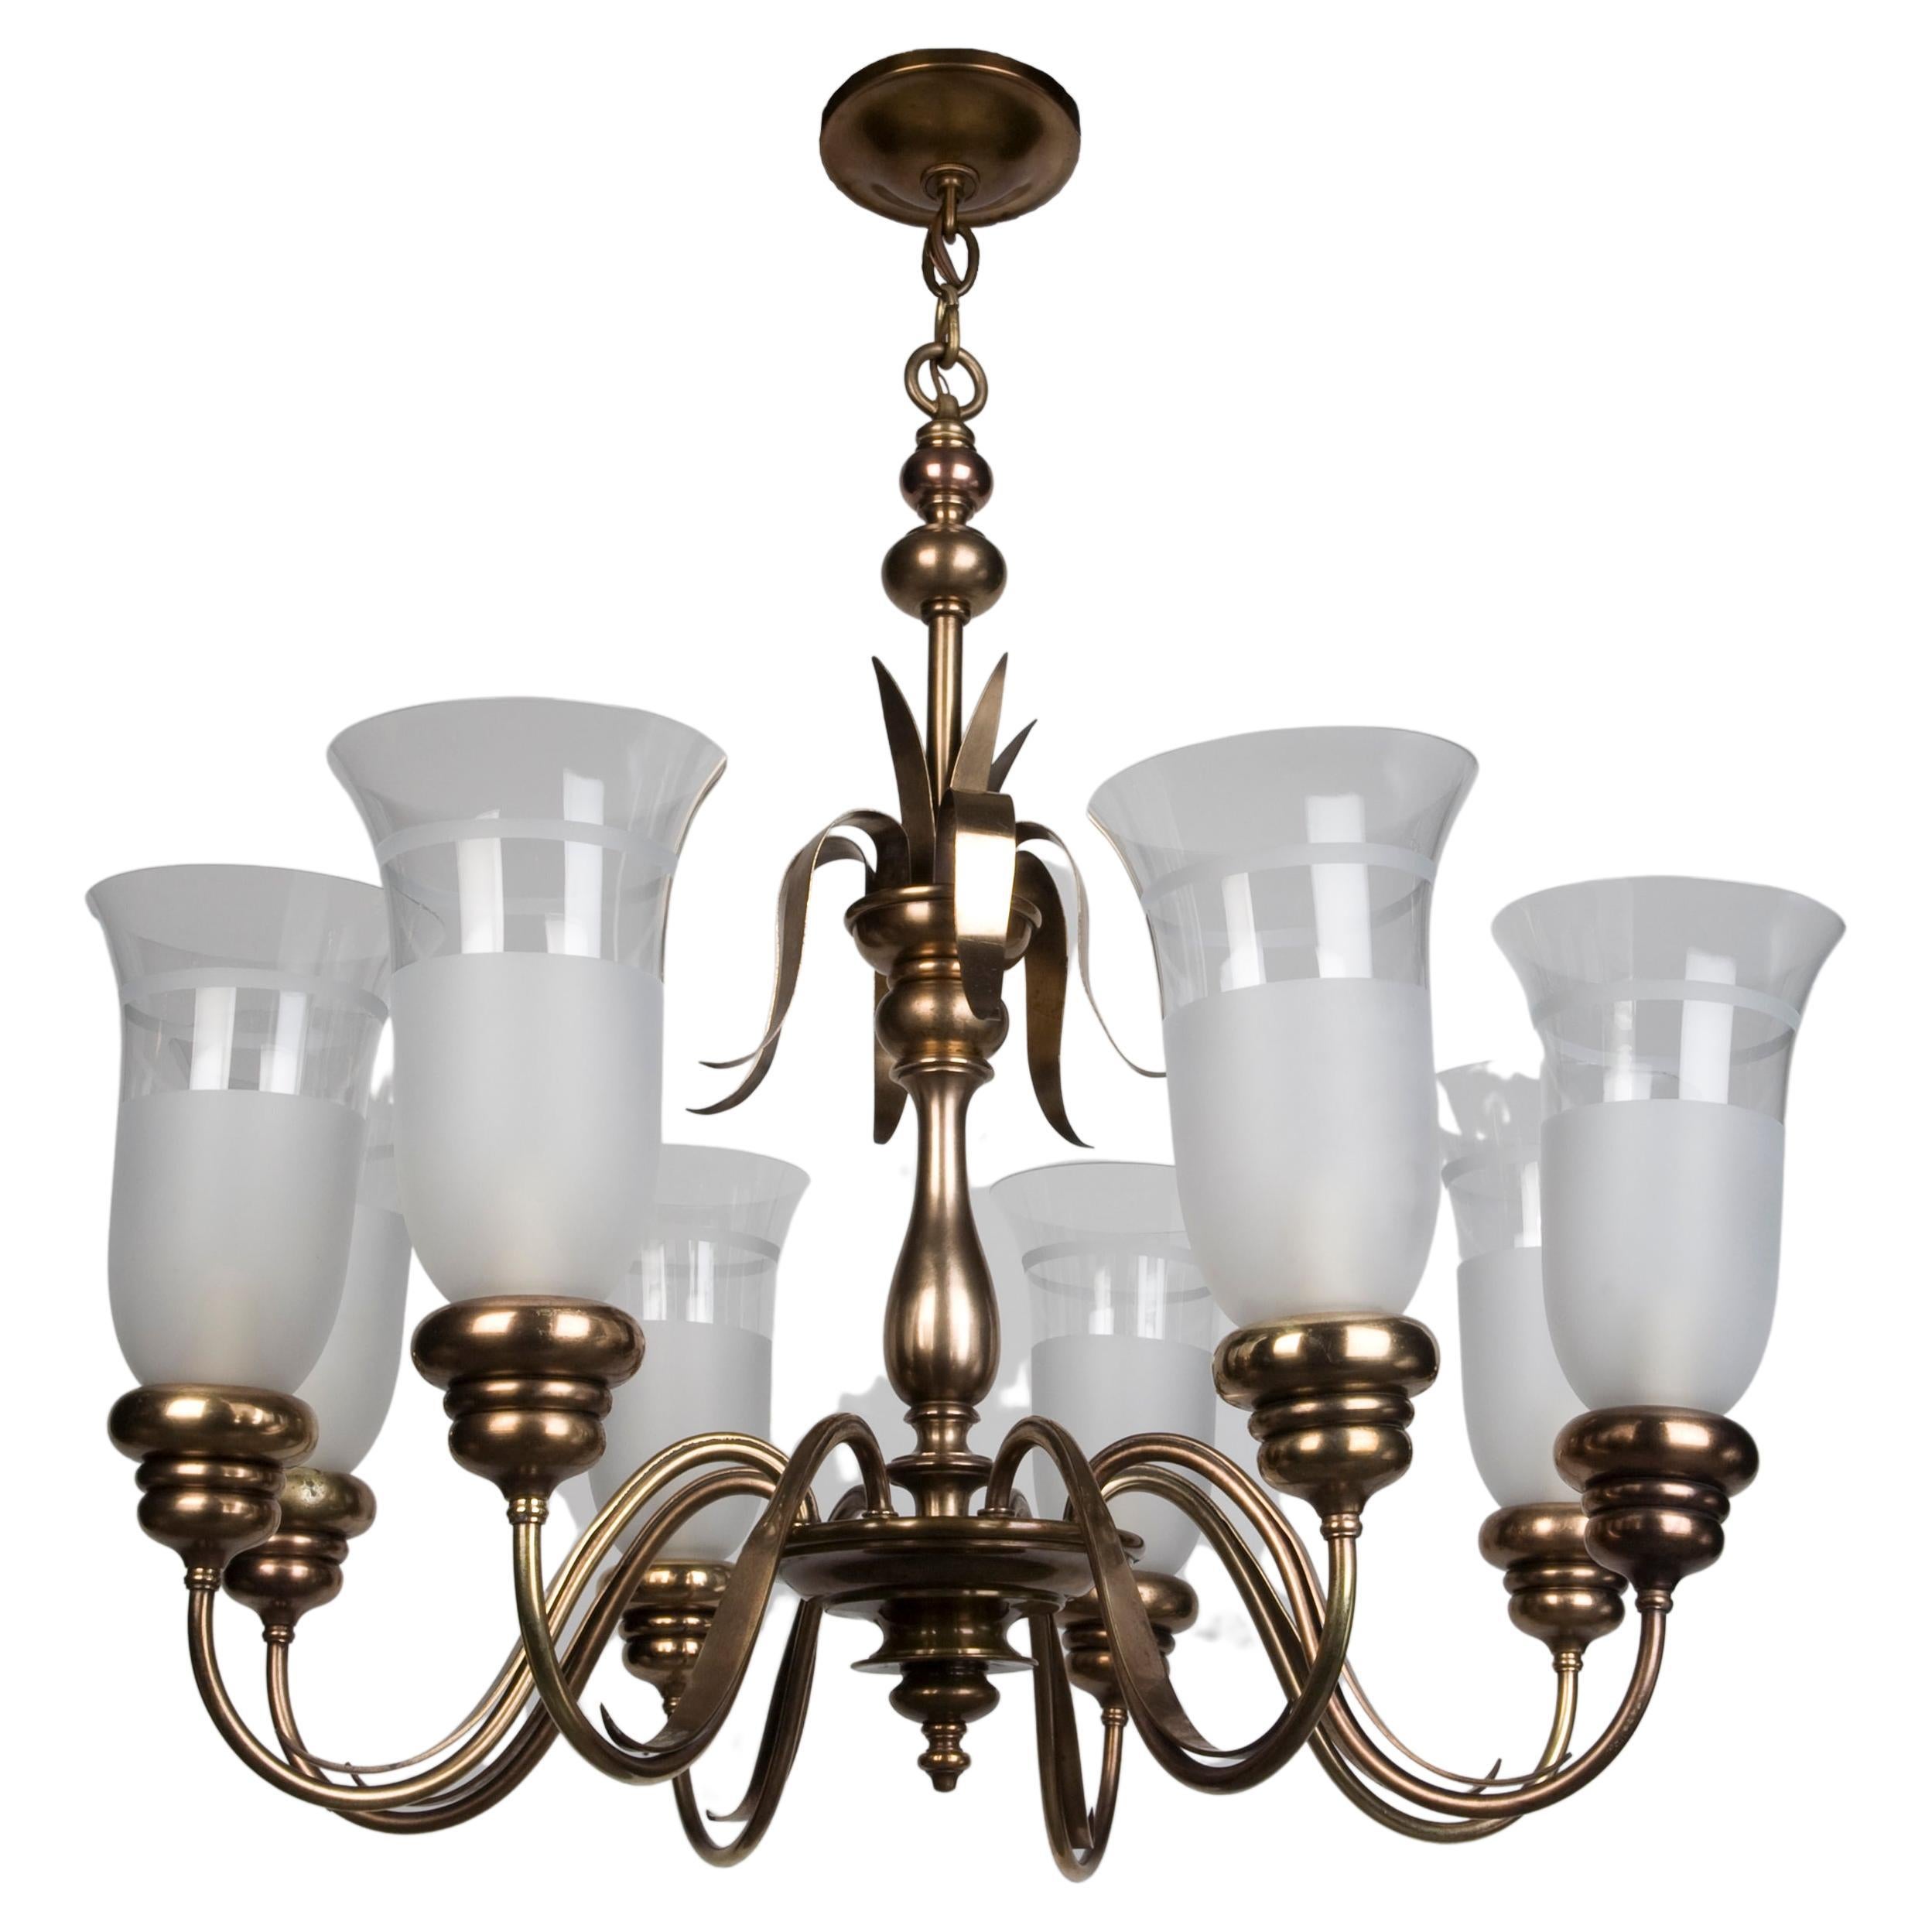 E. F. Caldwell Brass Chandelier with Frosted Hurricane Glass Shades, Circa 1940s